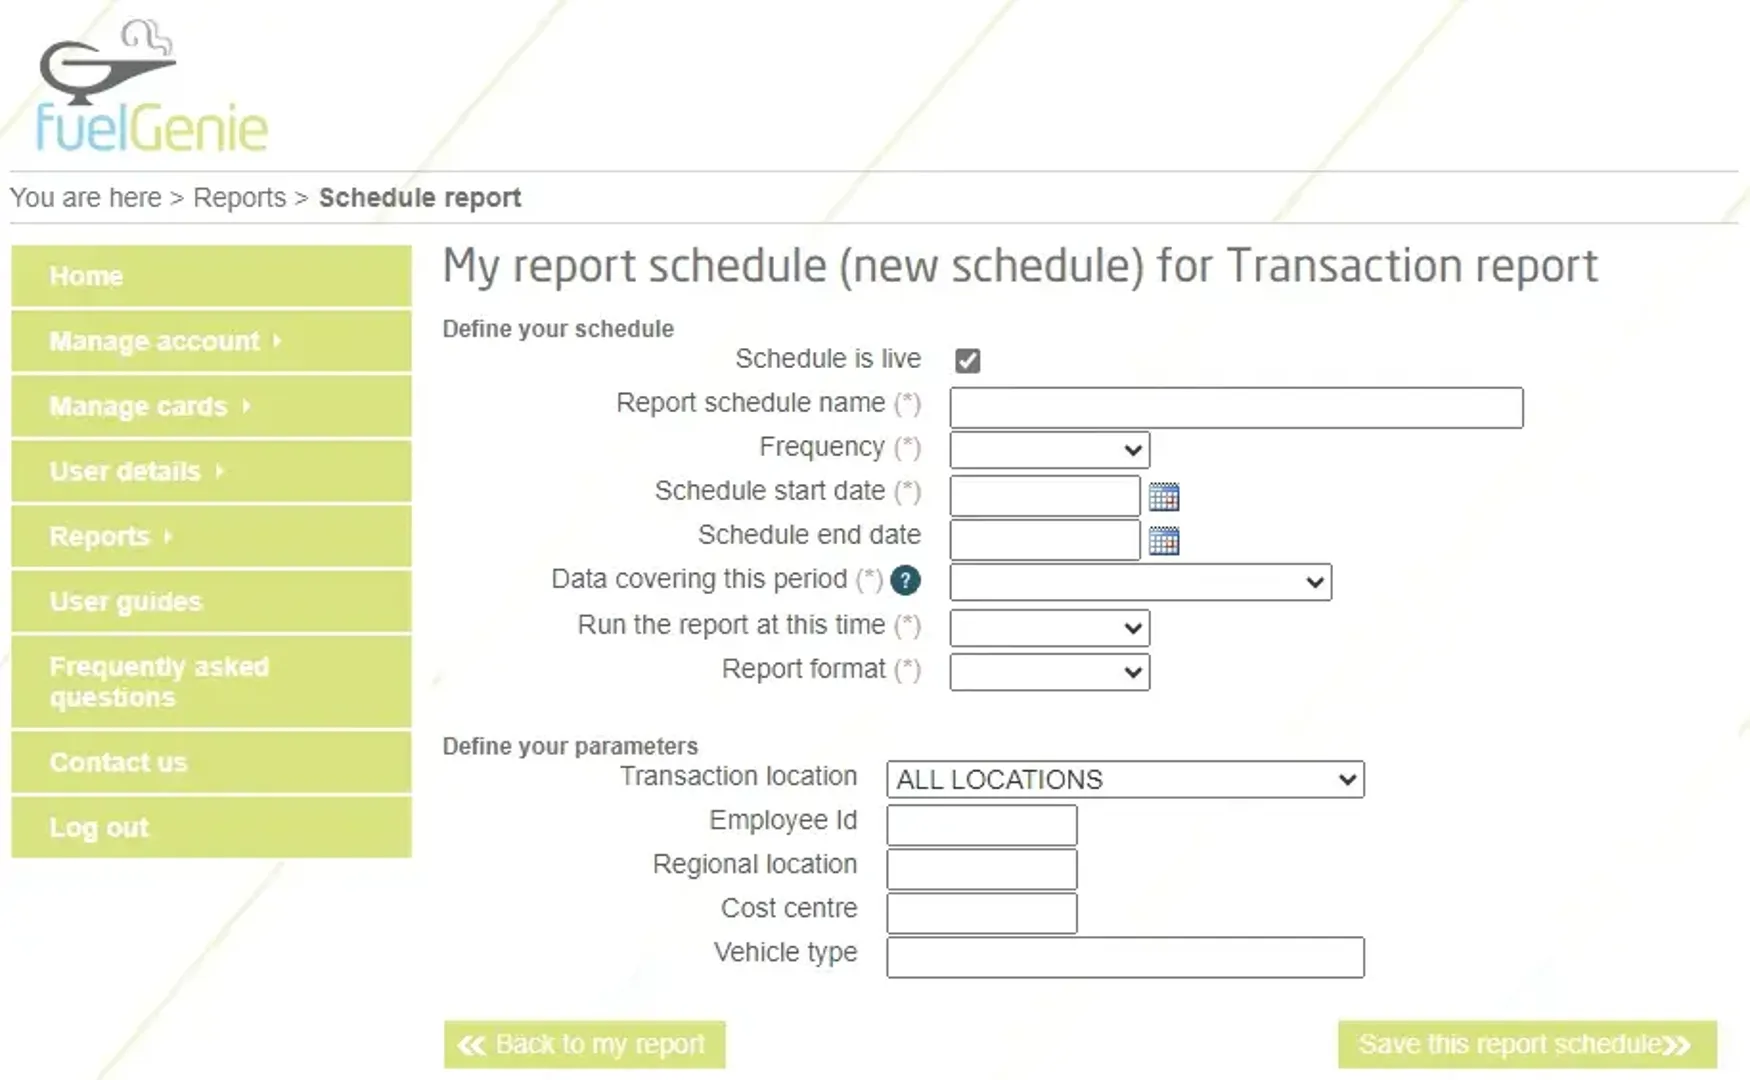 Dashboard view of report schedule in the fuelGenie account